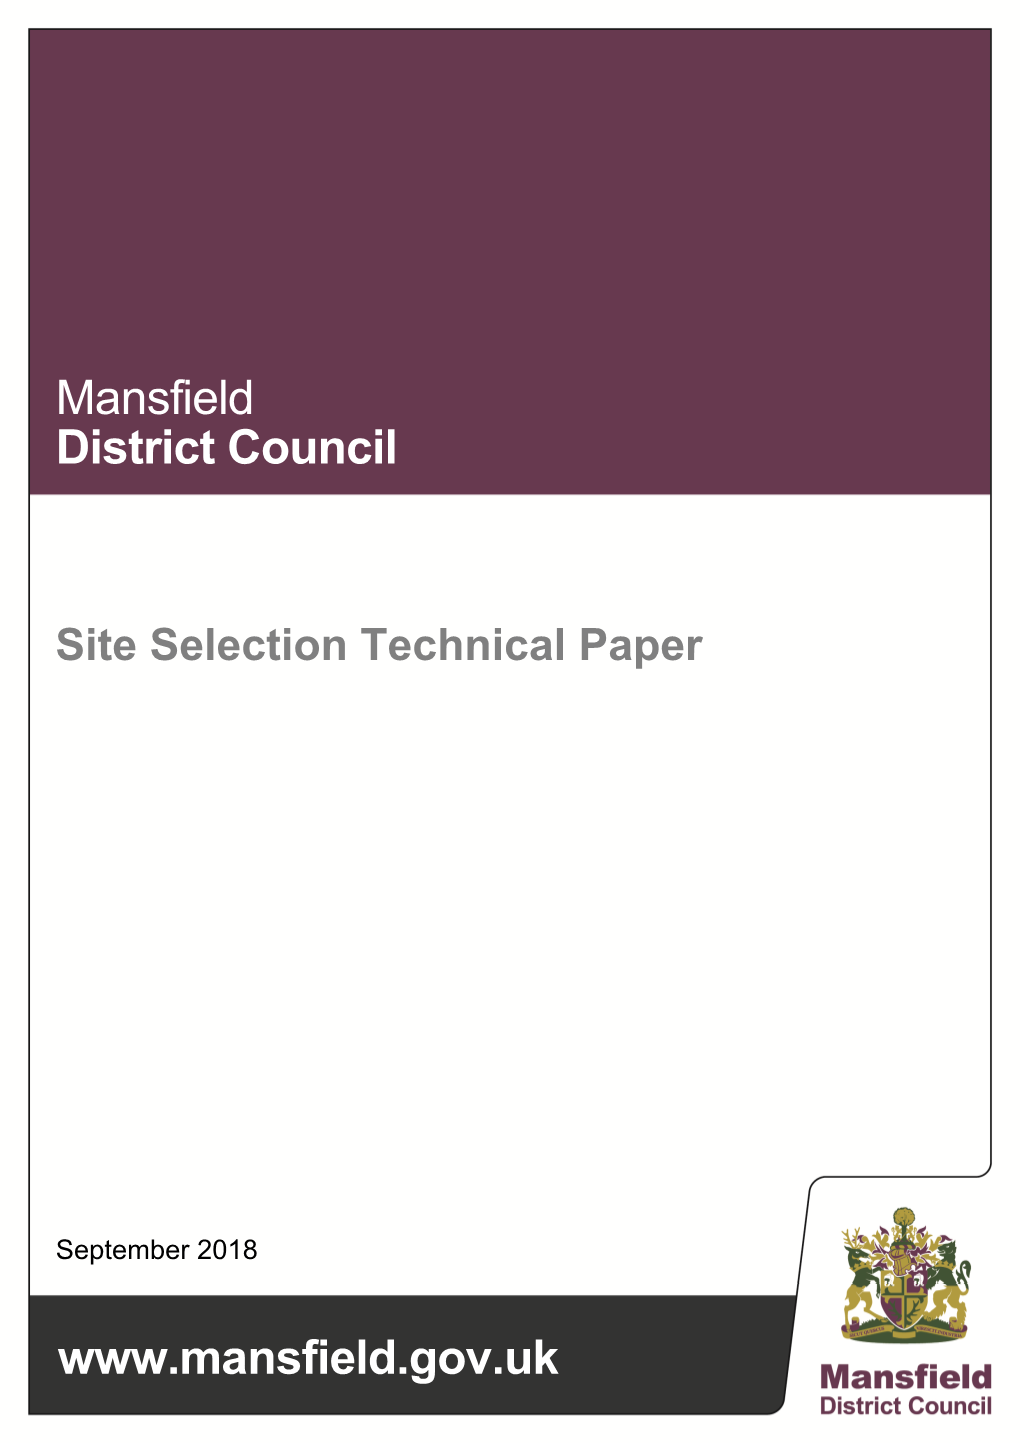 Site Selection Technical Paper, 2018